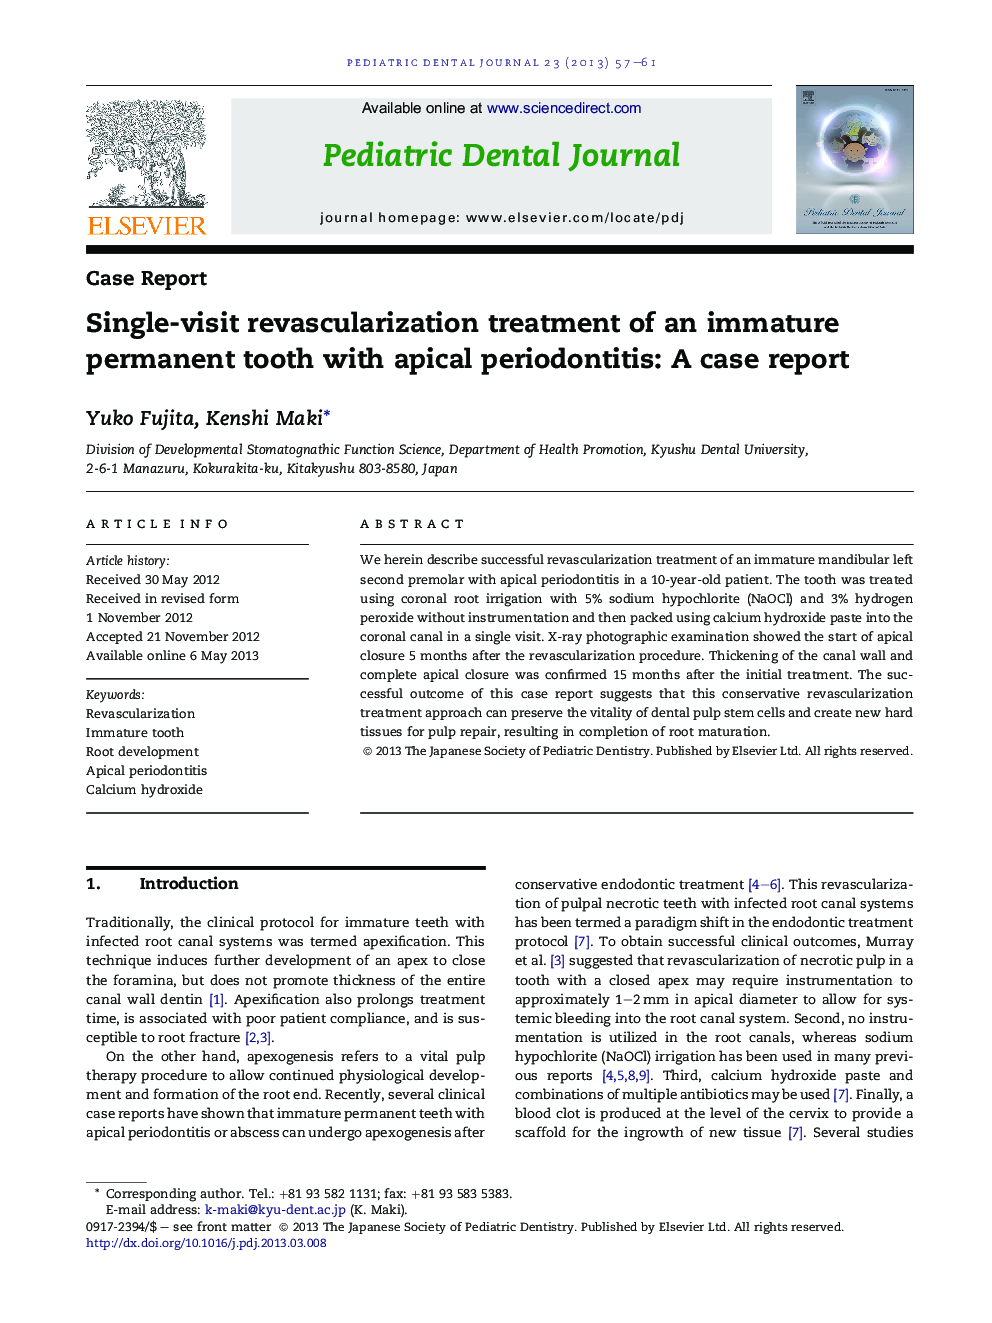 Single-visit revascularization treatment of an immature permanent tooth with apical periodontitis: A case report